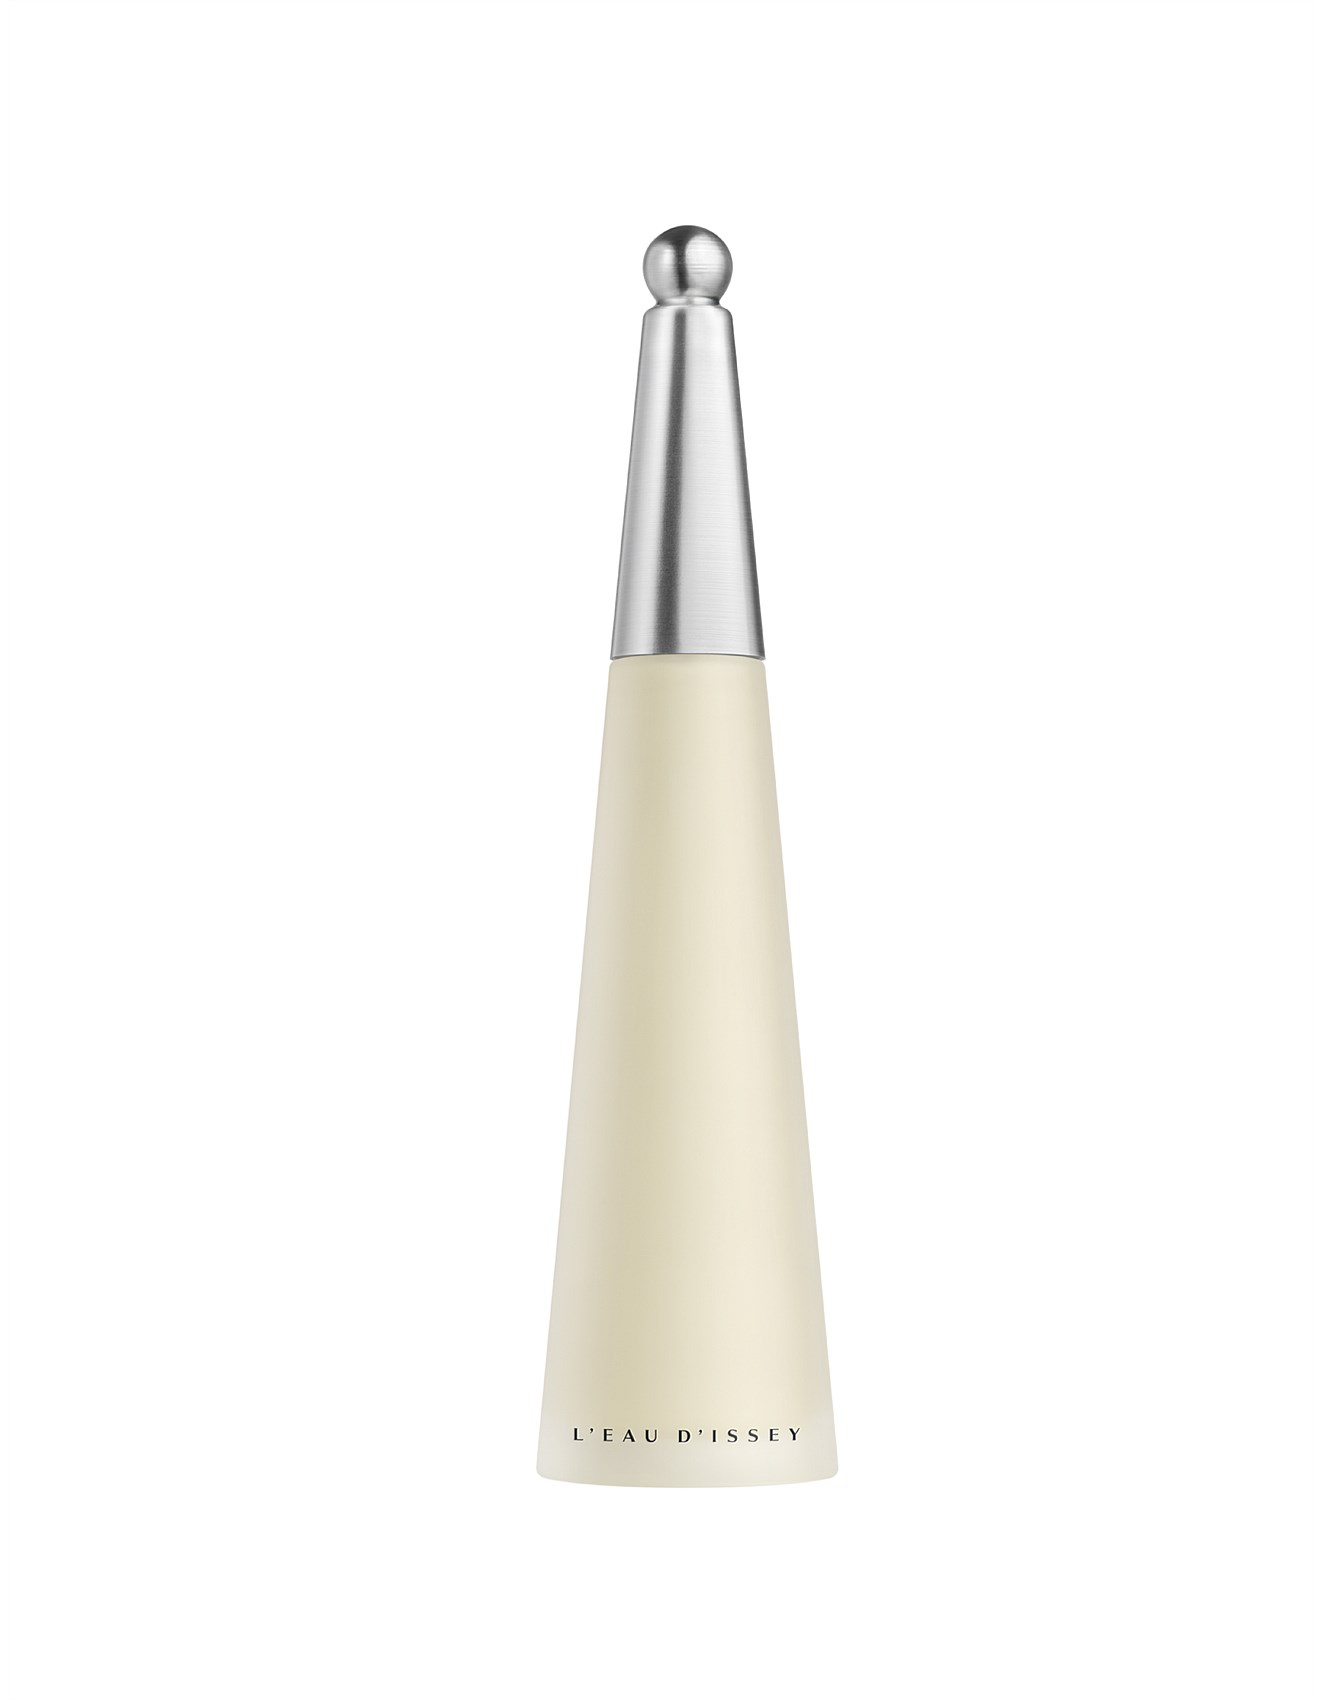 Issey Miyake L'Eau d'Issey EDT 50ml